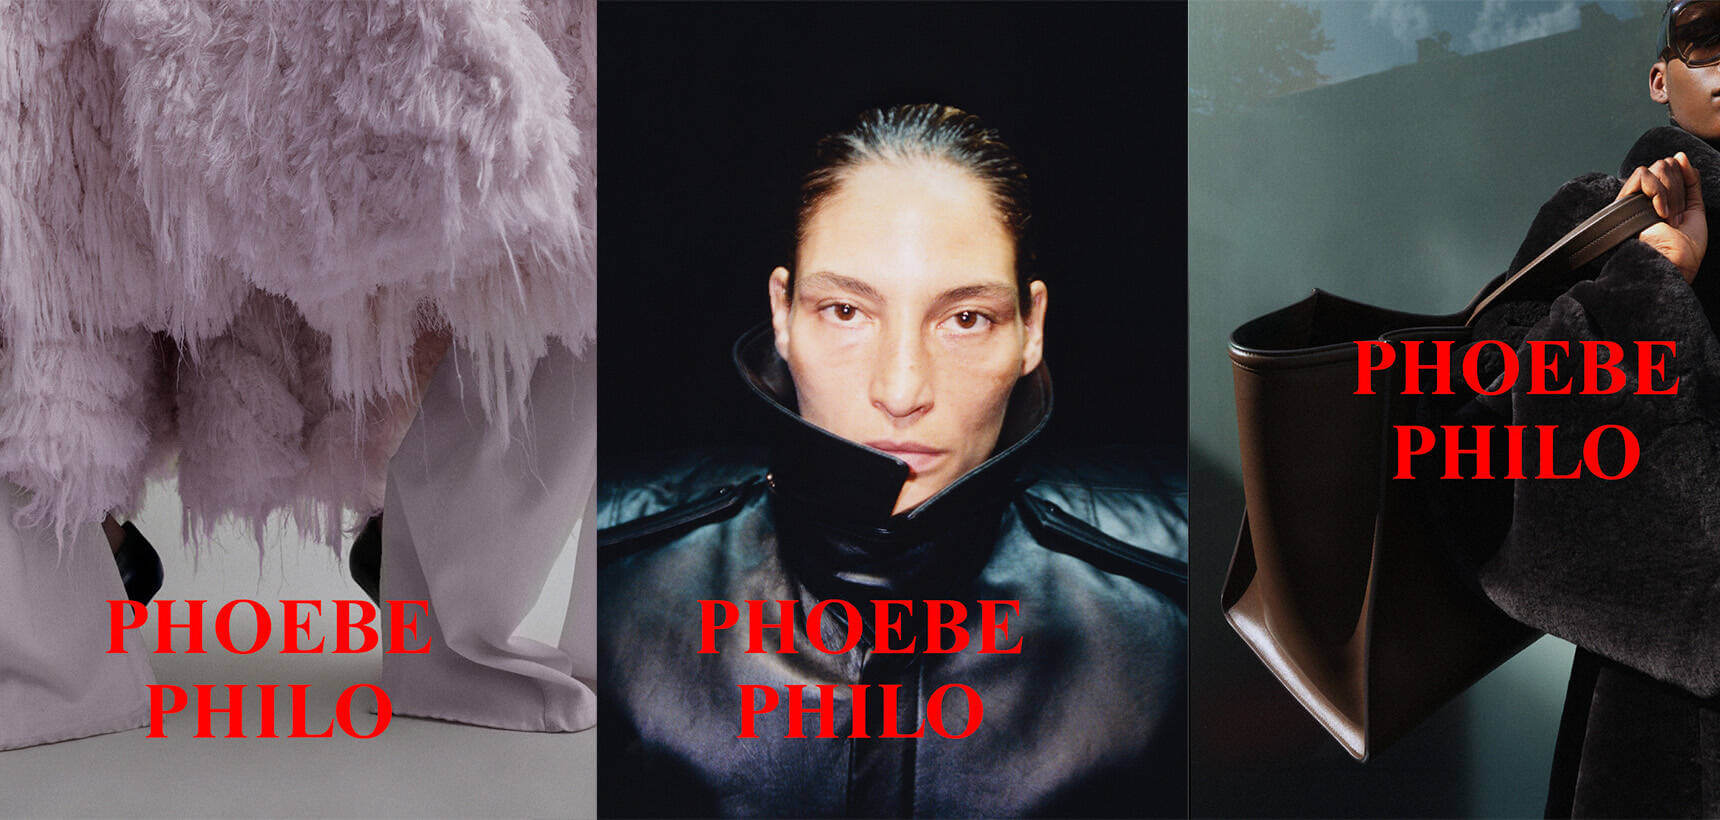 Phoebe Philo Returns to Fashion With Her Own Brand